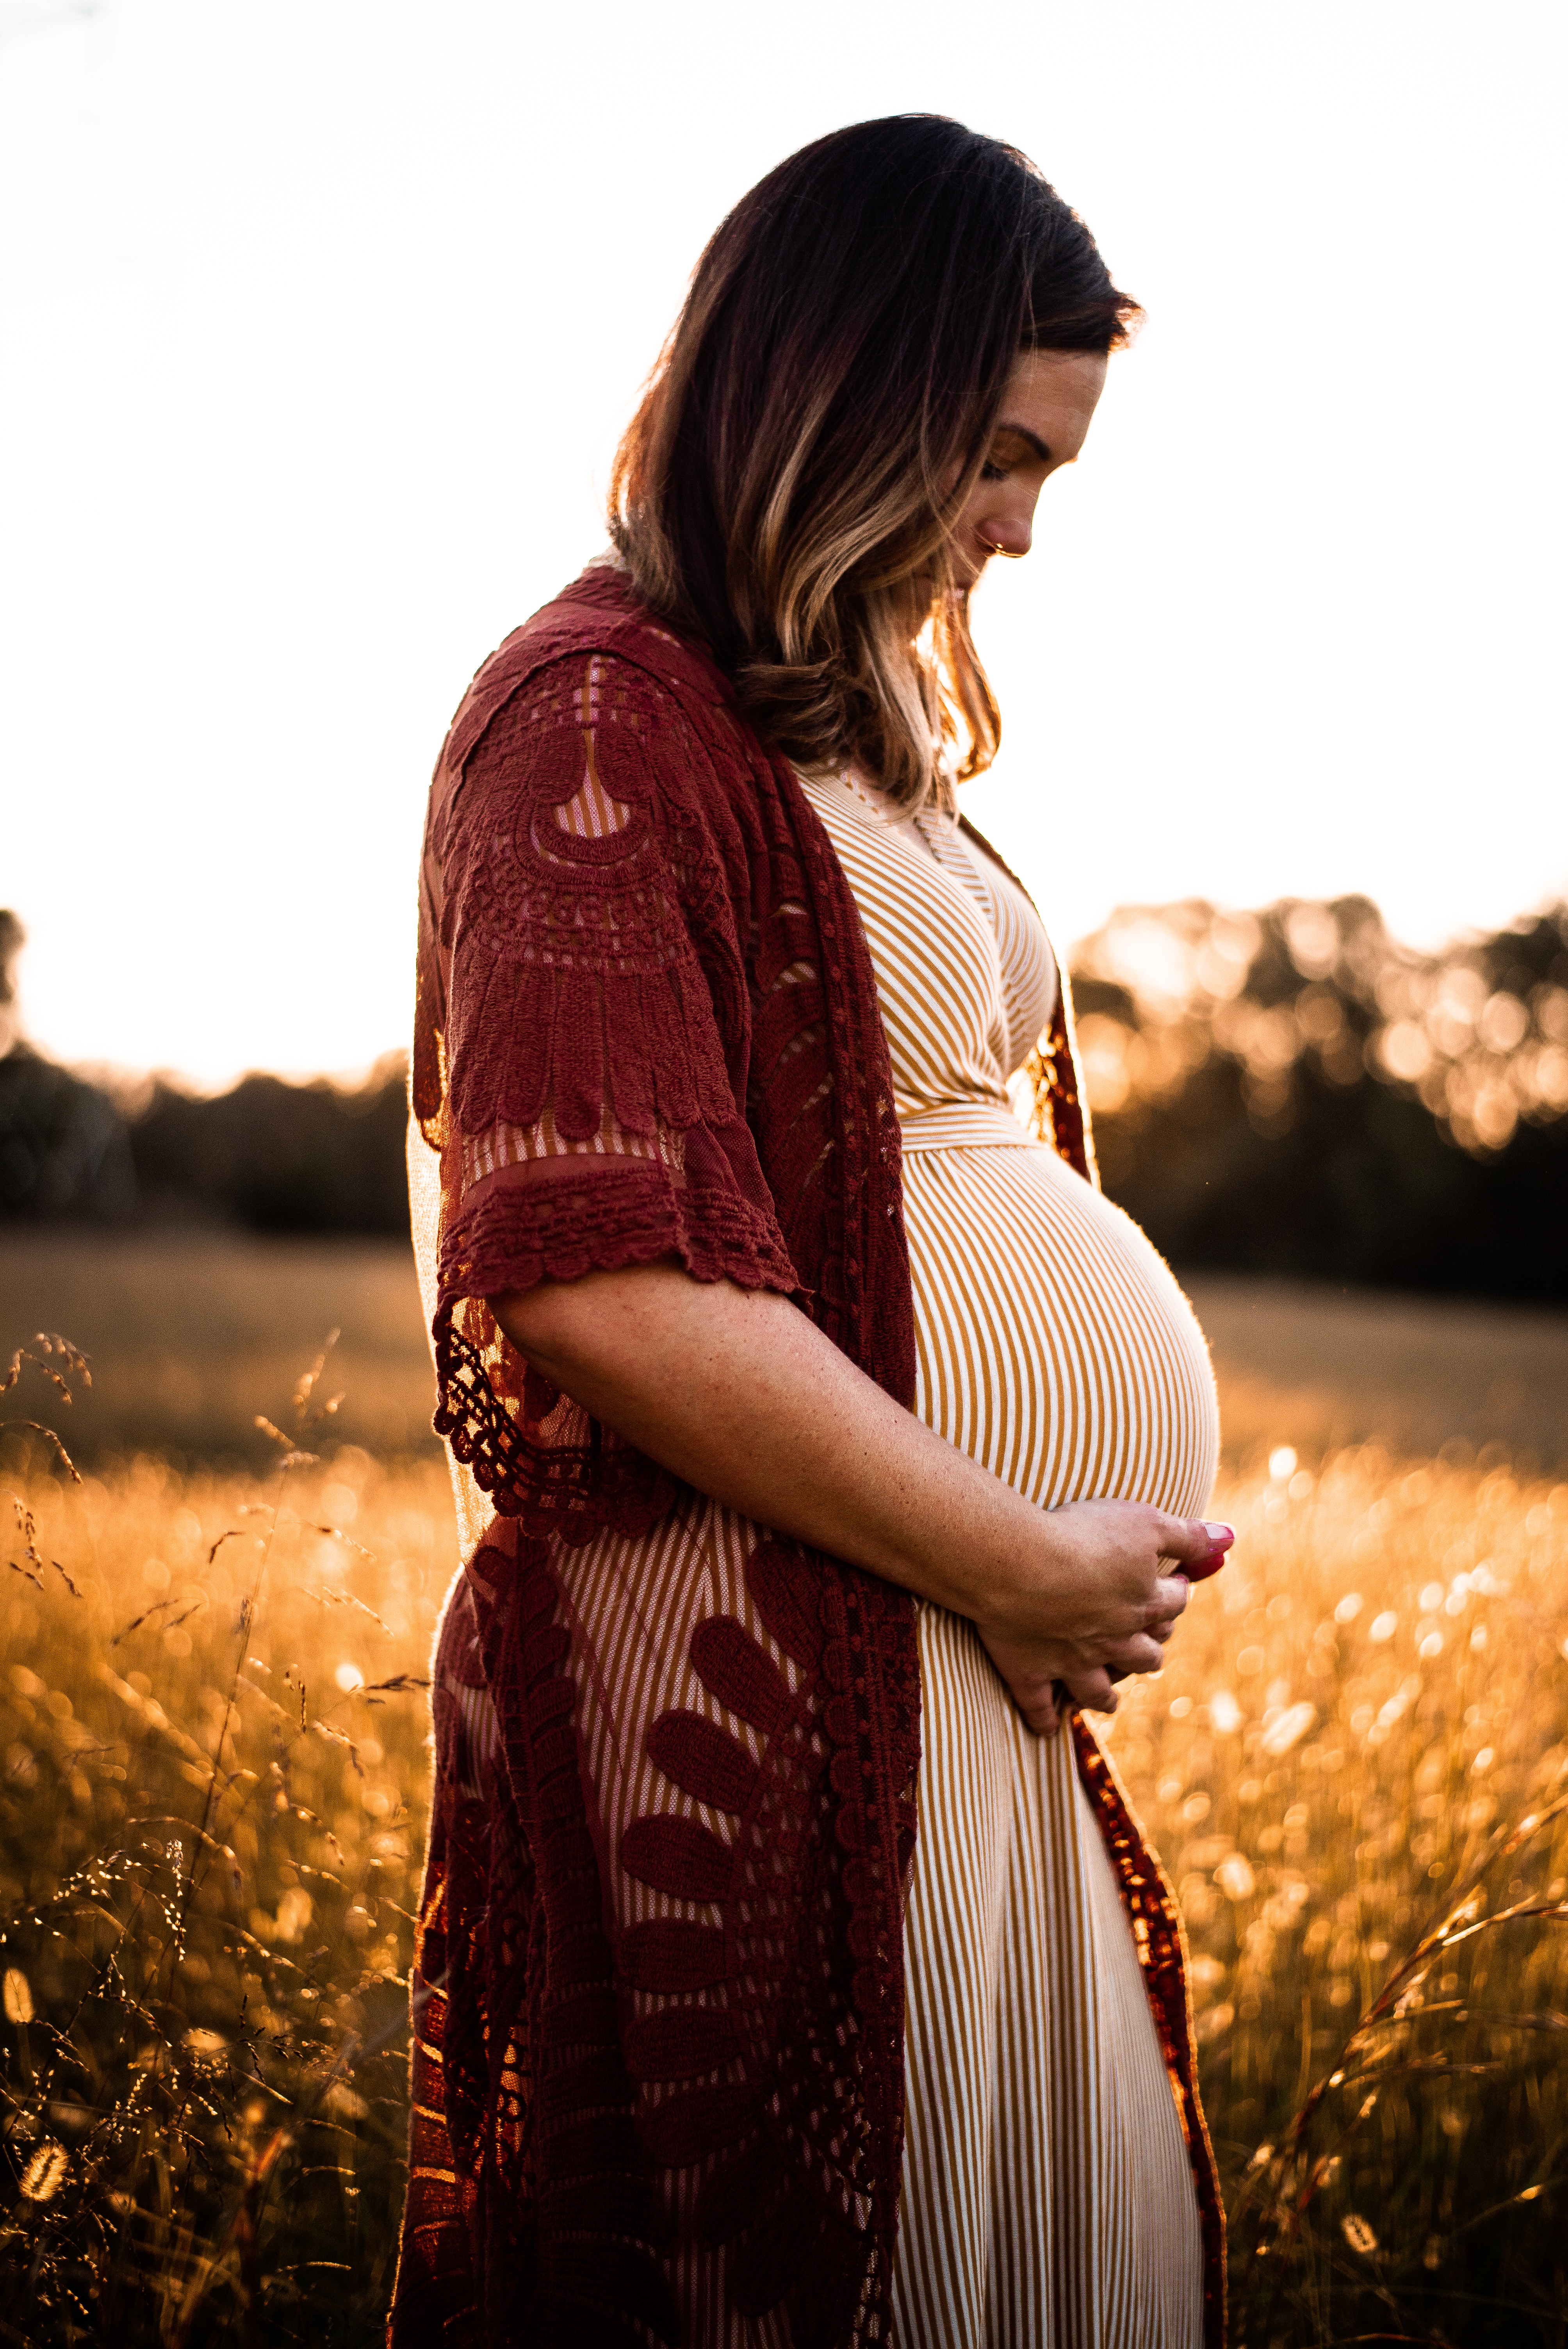 Let your awesomeness shine right through! Unsplash (Public Domain) #mothersday #pregnant #people #girl #girls #freetoedit